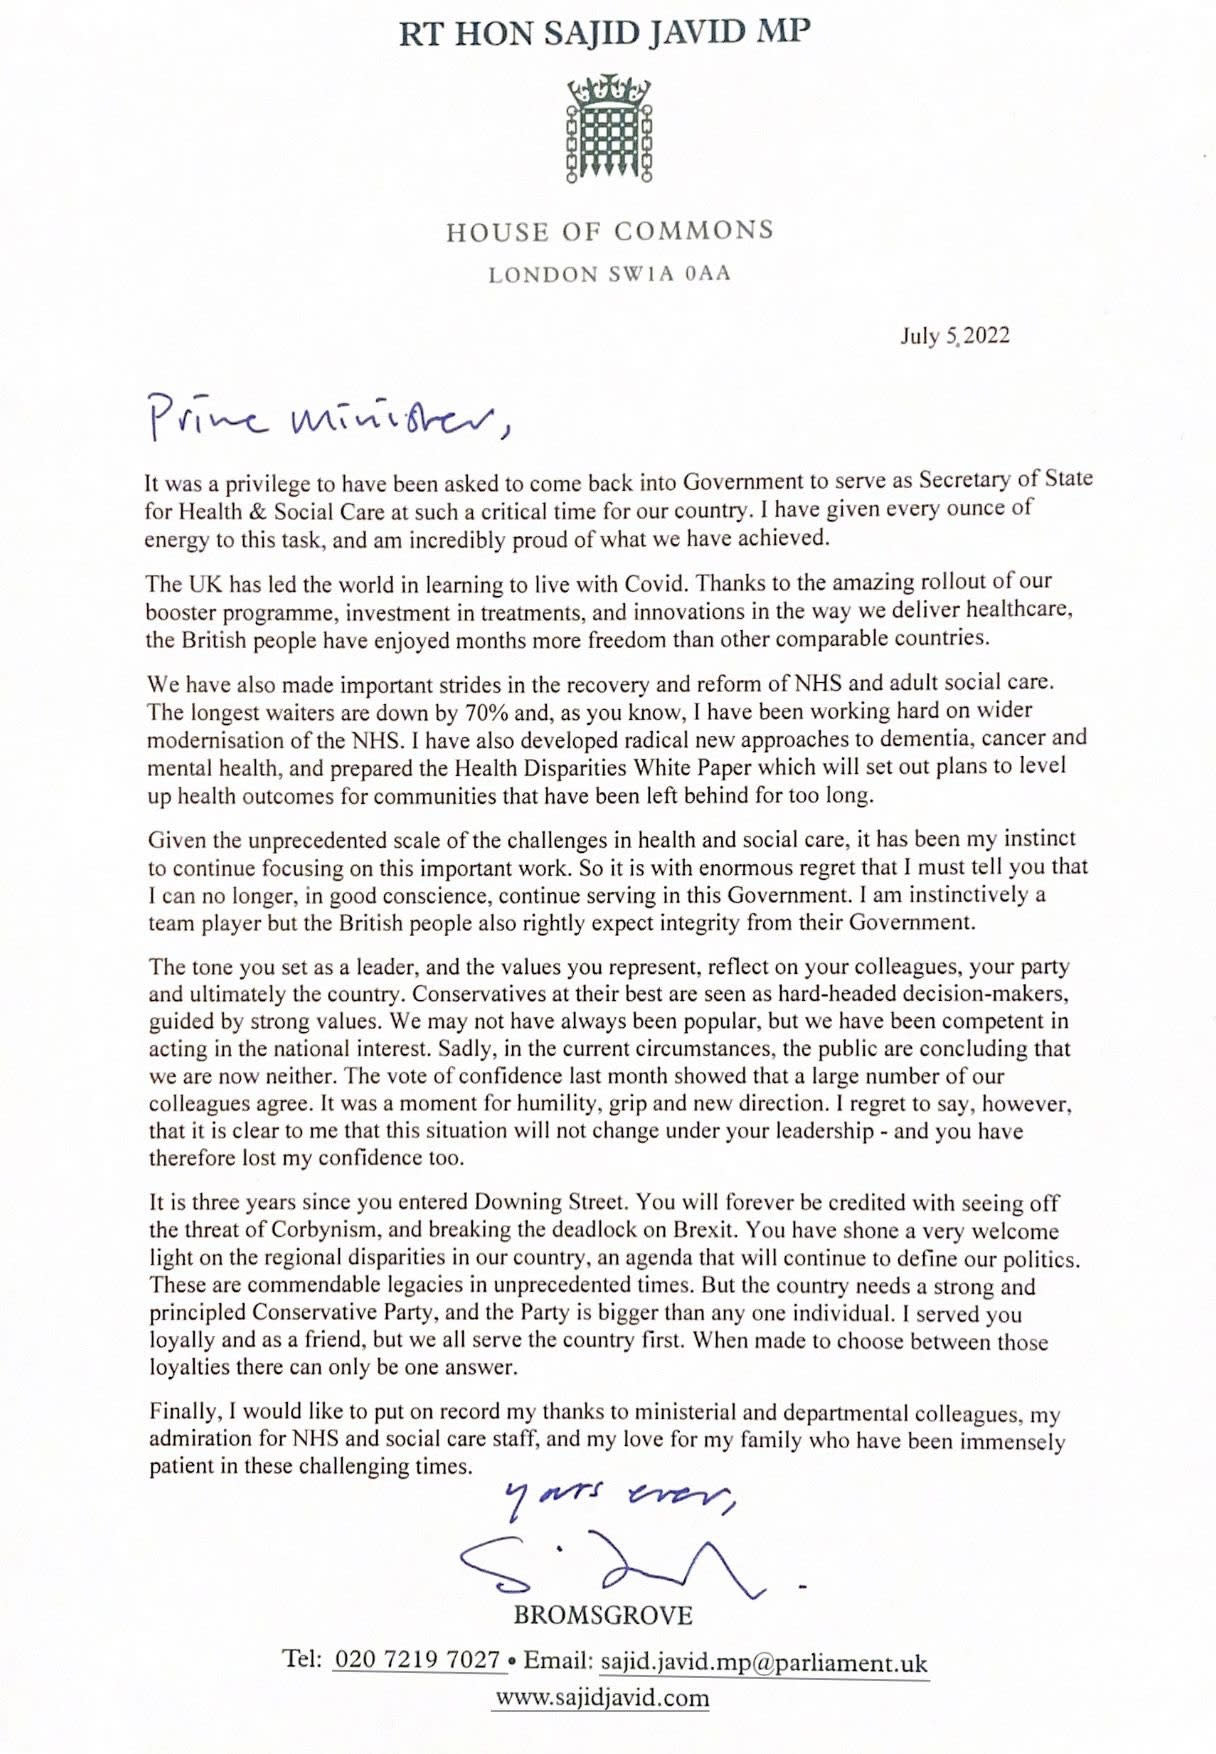 Handout photo of the letter sent by Health Secretary Sajid Javid to Prime Minister Boris Johnson offering his resignation and saying that following last month's vote of confidence 